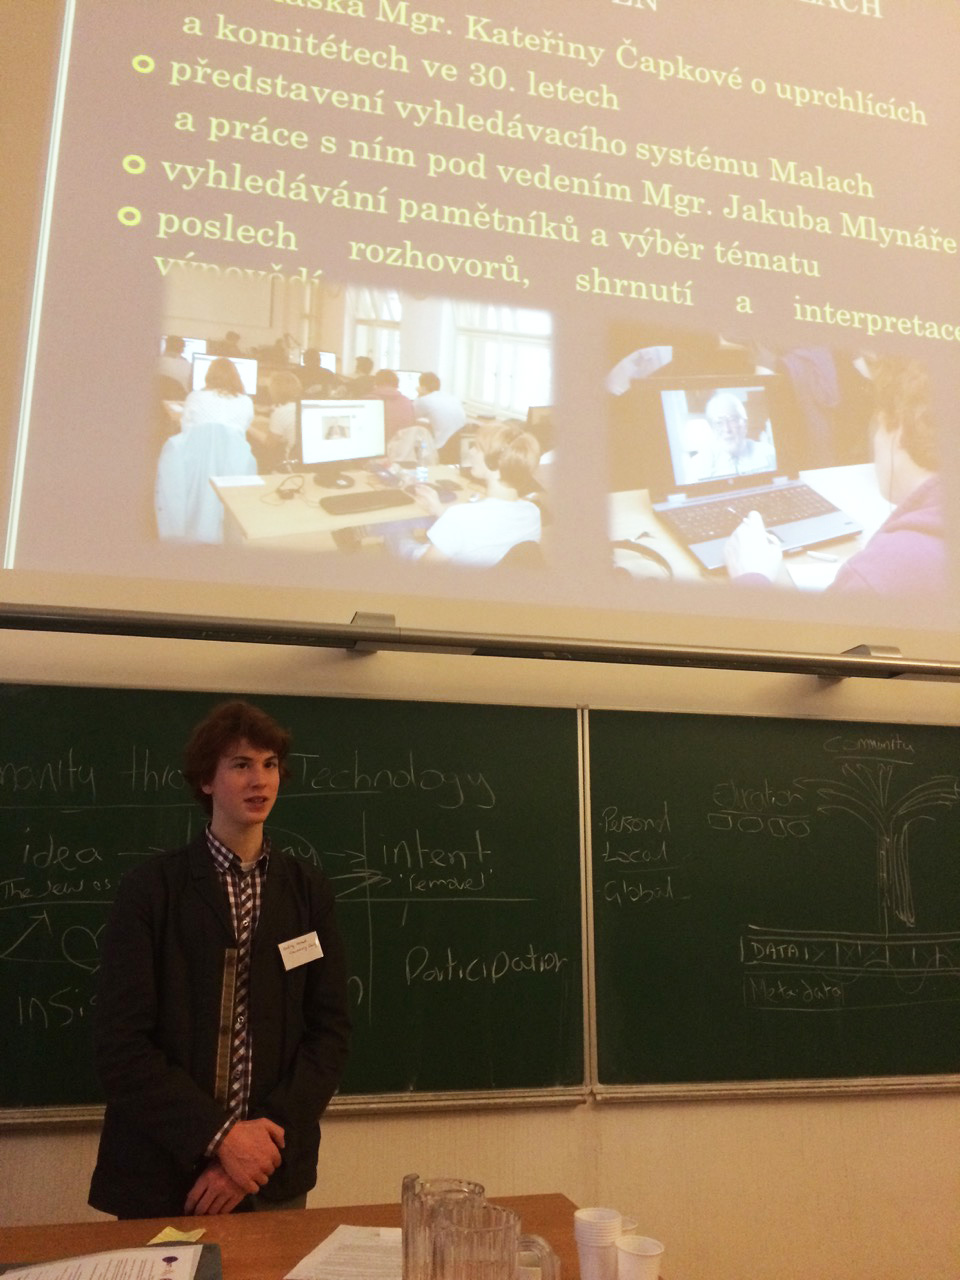 Students of the Lauder school in Prague discuss their experiences with conducting research in the VHA